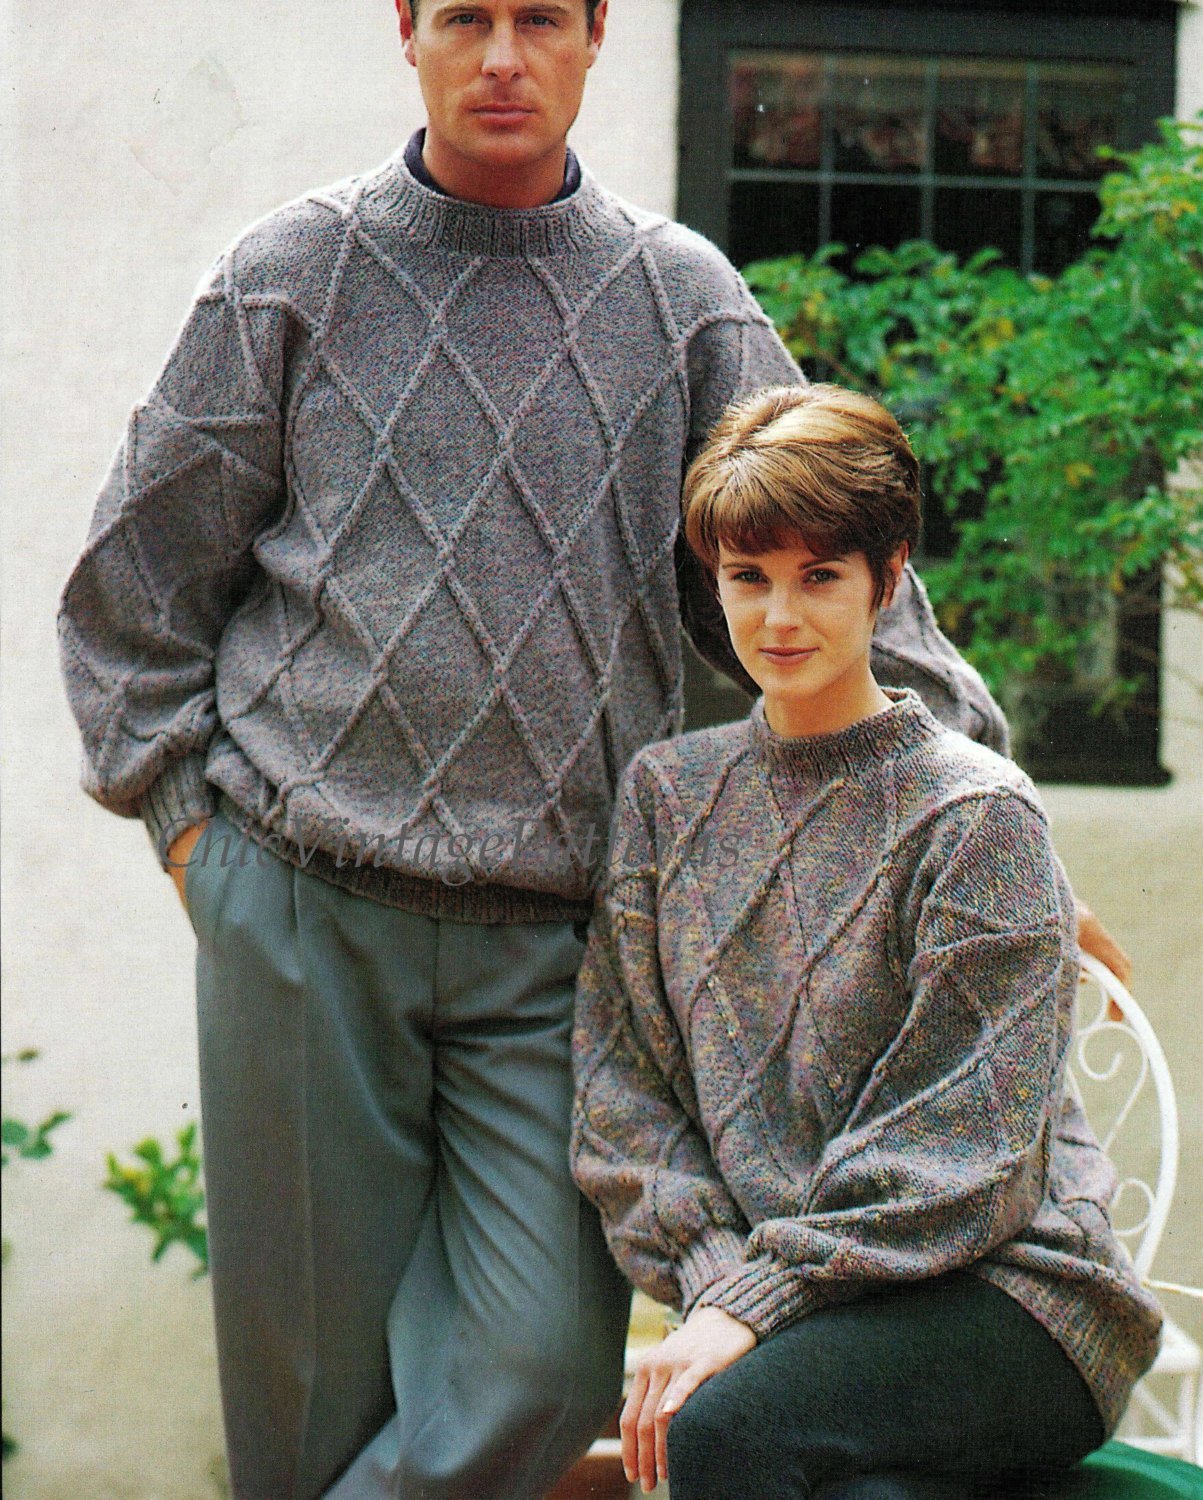 His & Her Knitted Jumpers, Multiple Sizes | ChicVintagePatterns